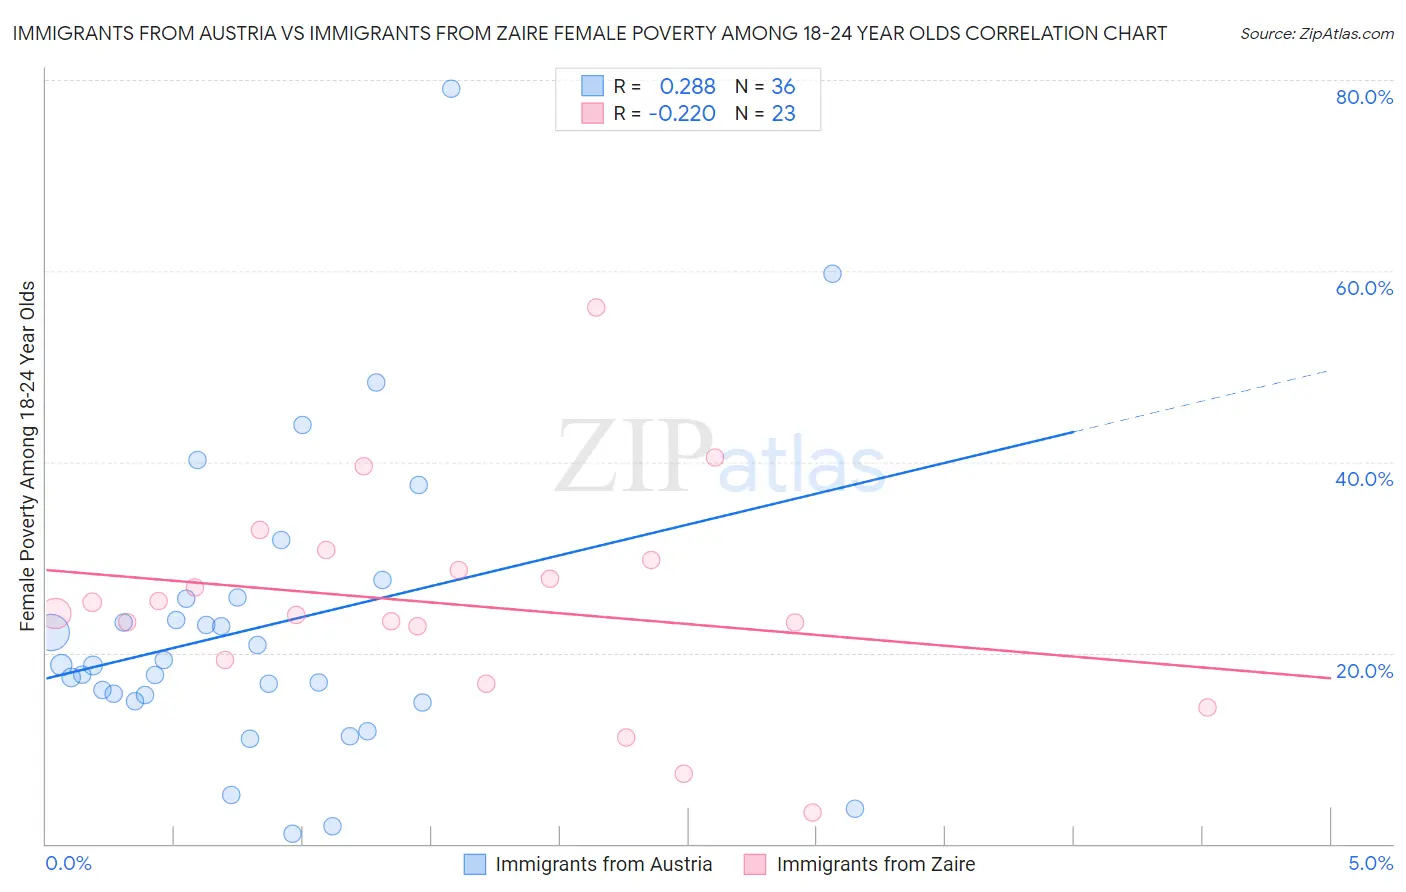 Immigrants from Austria vs Immigrants from Zaire Female Poverty Among 18-24 Year Olds